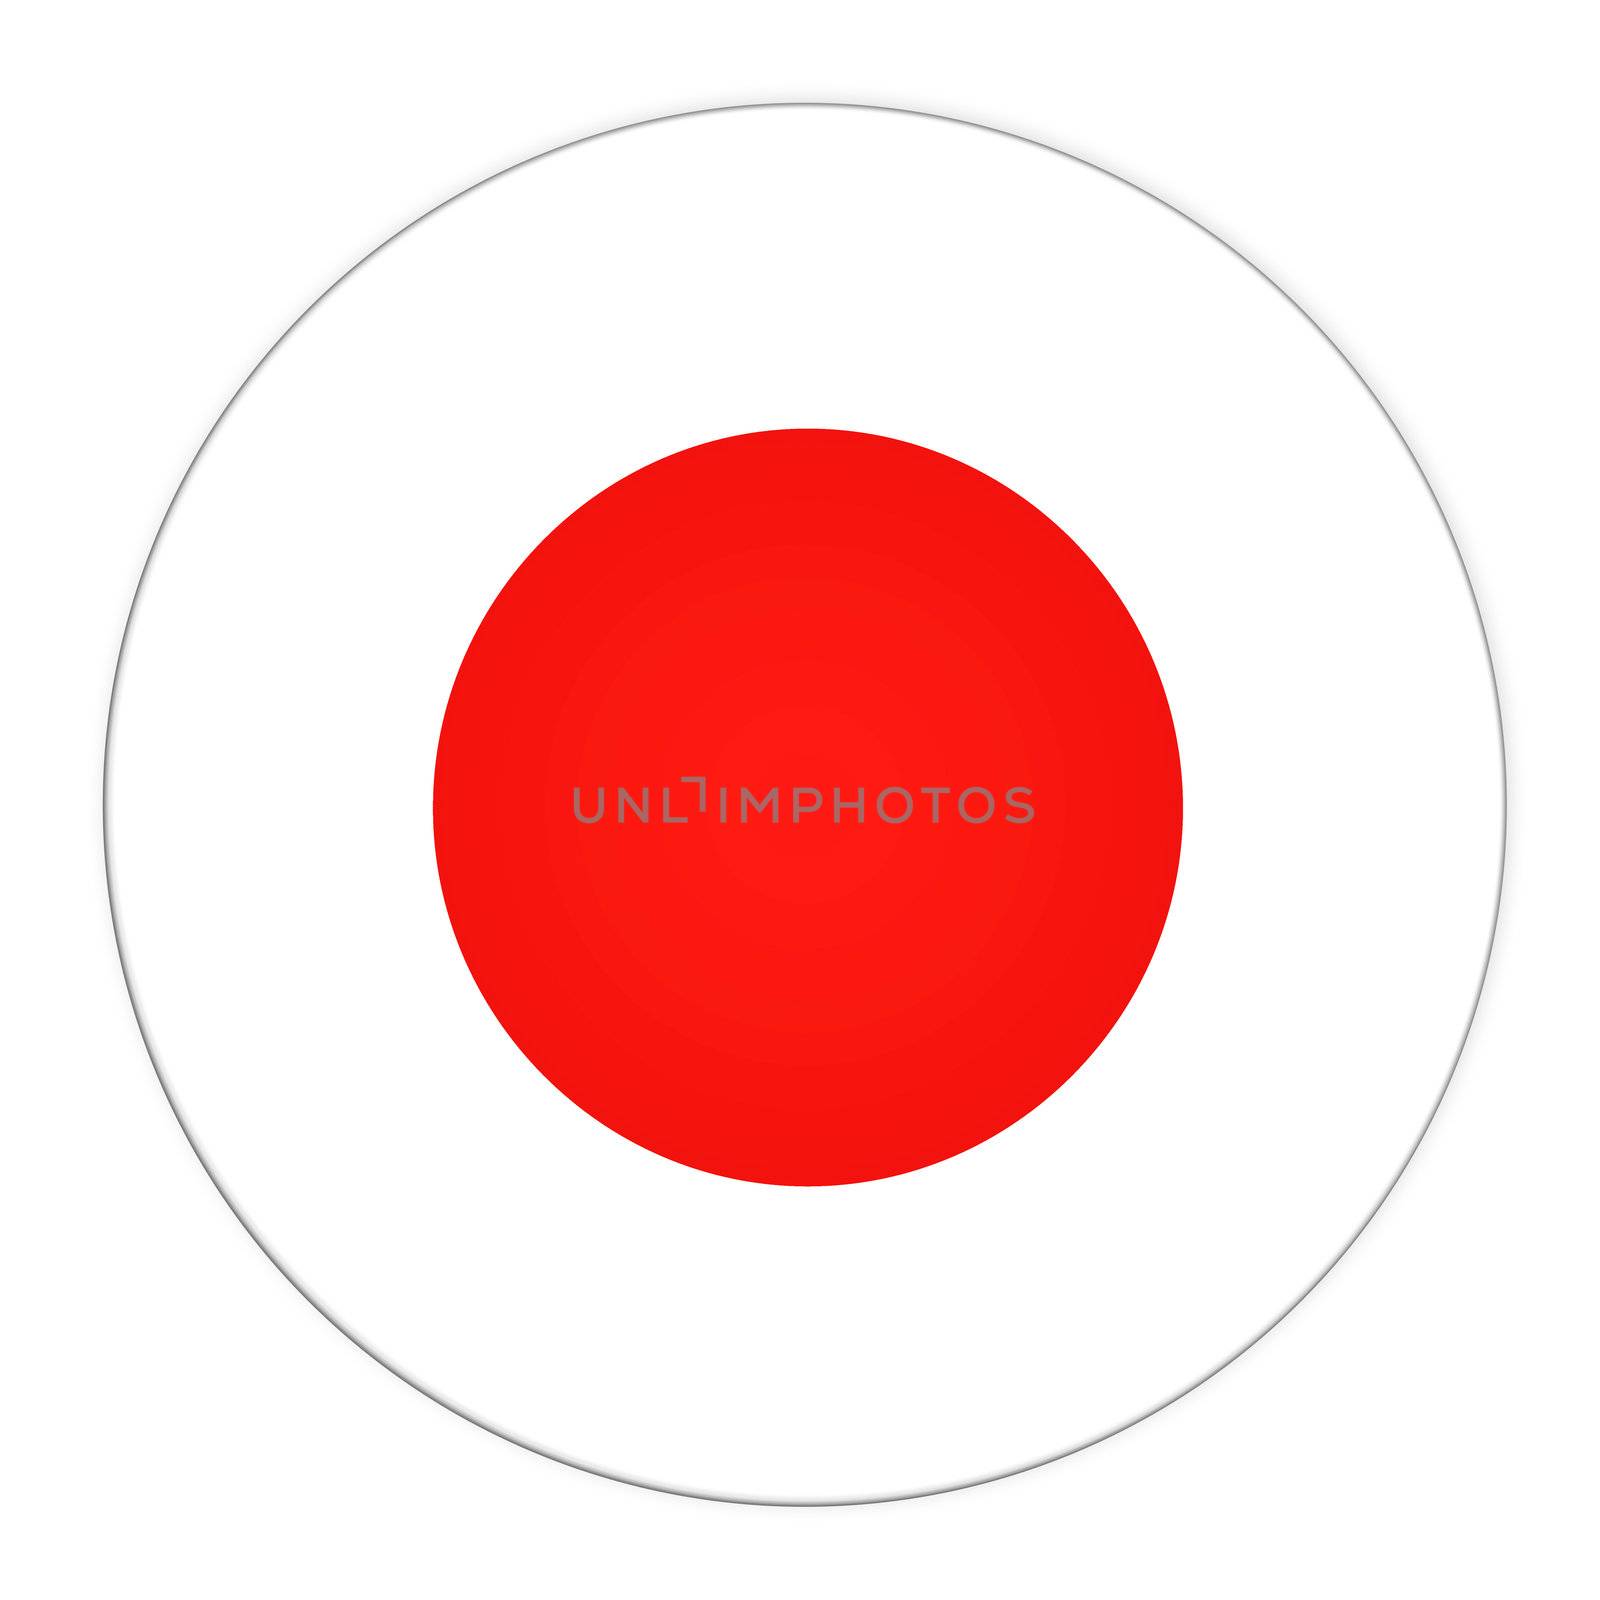 Abstract illustration: button with flag from Japan country